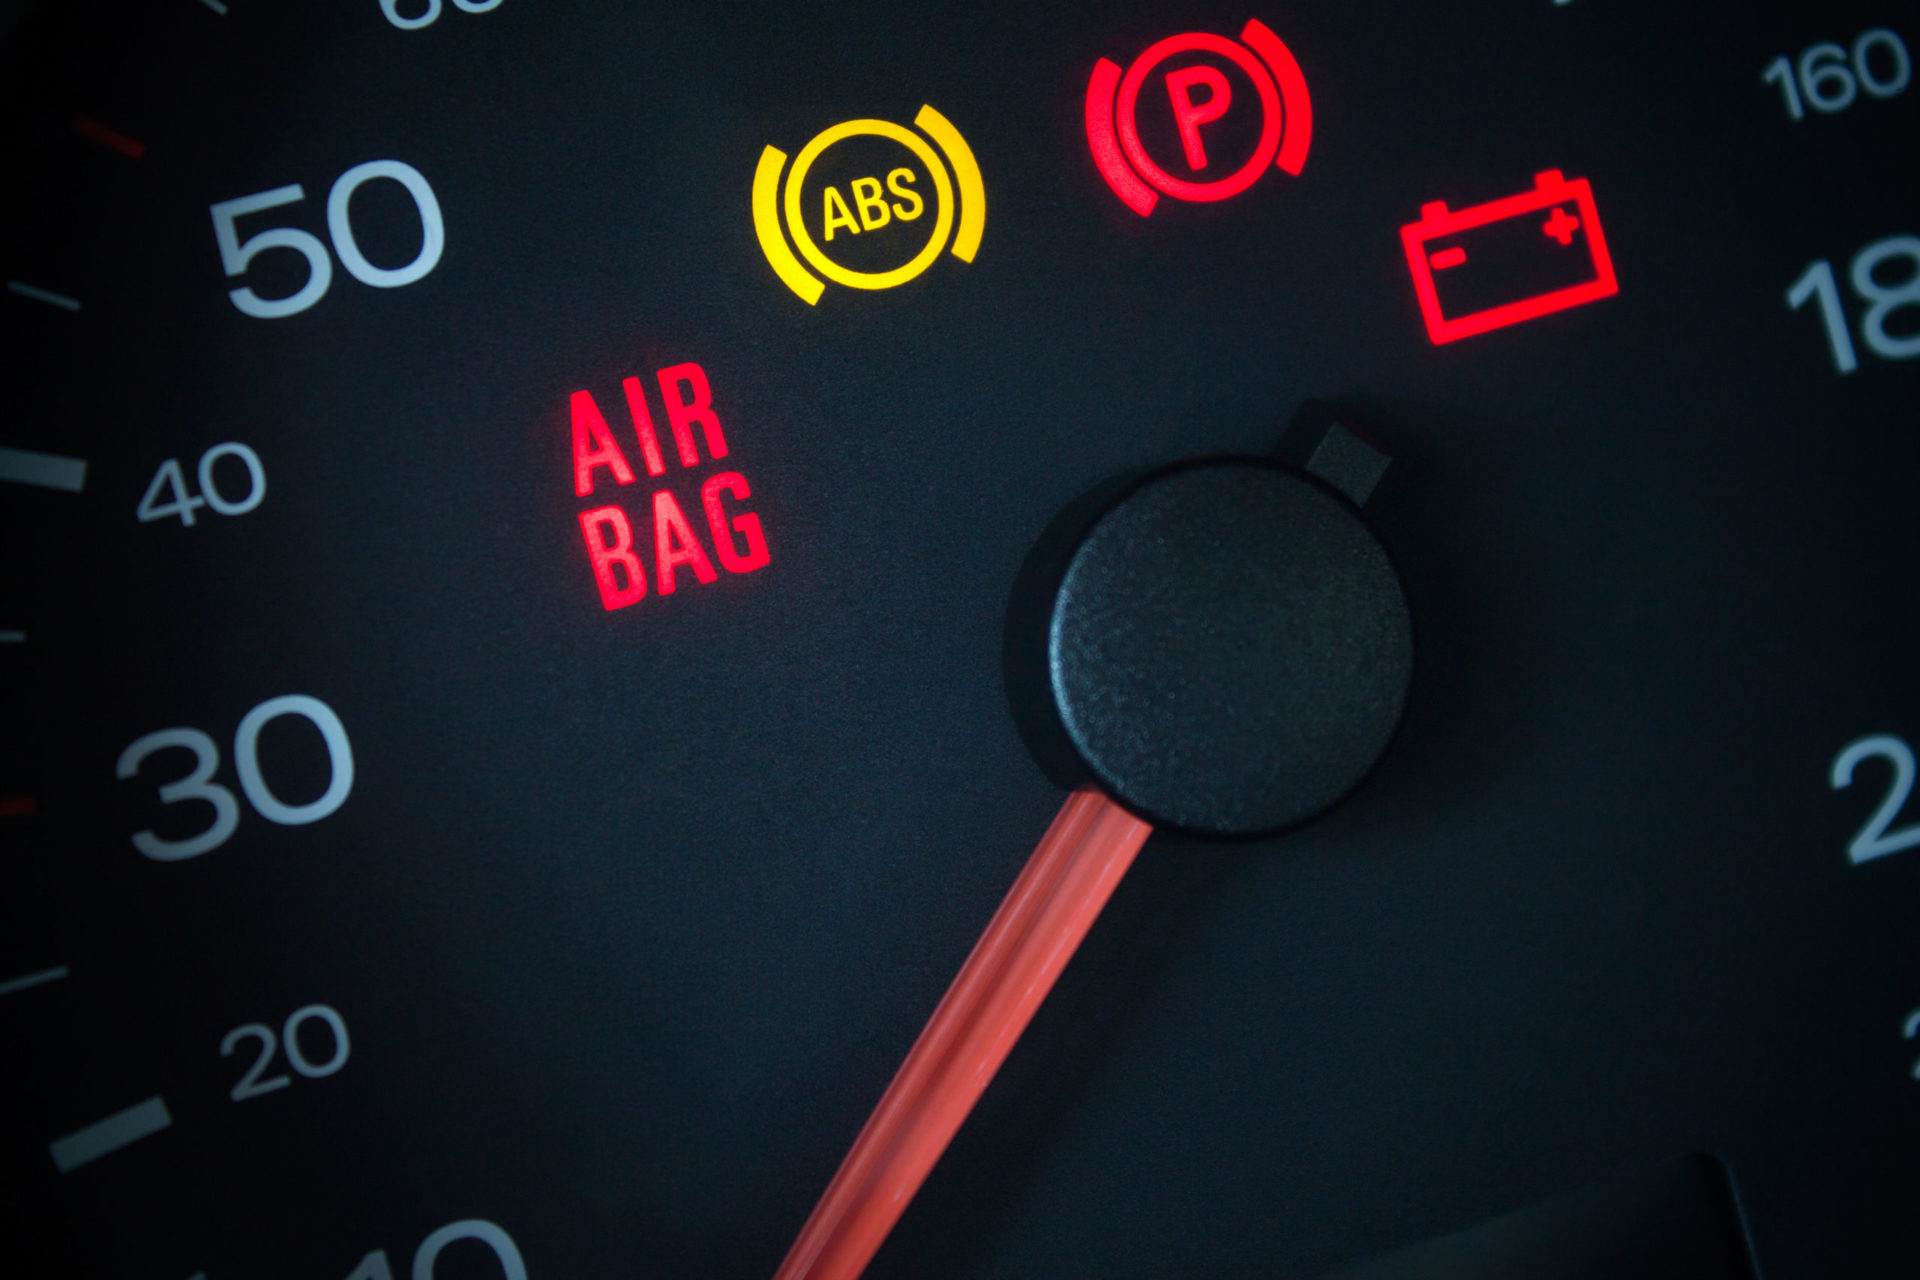 The Air Bag light, ABS light, Parking Brake light, and Battery light are lit up on the vehicle dashboard. We describe the top 5 Nissan vehicle issues.